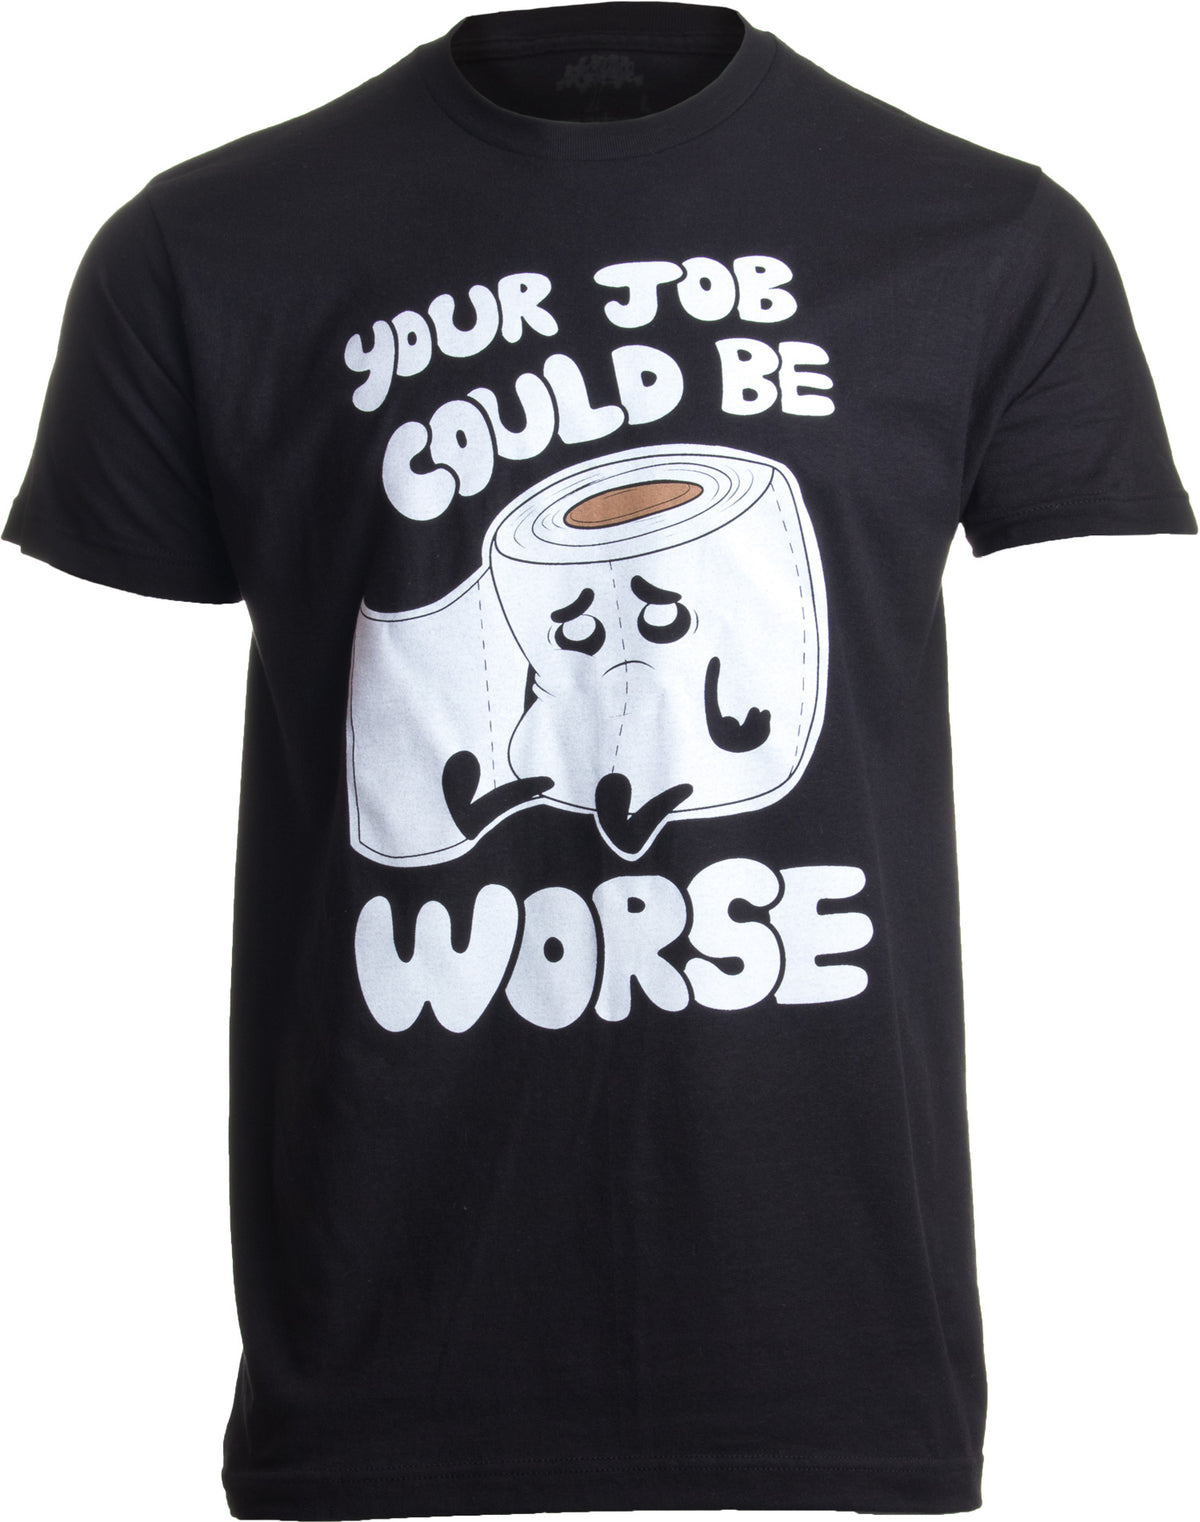 Your Job Could Be Worse | Inappropriate Funny Toilet Humor Joke Pun Men T-shirt